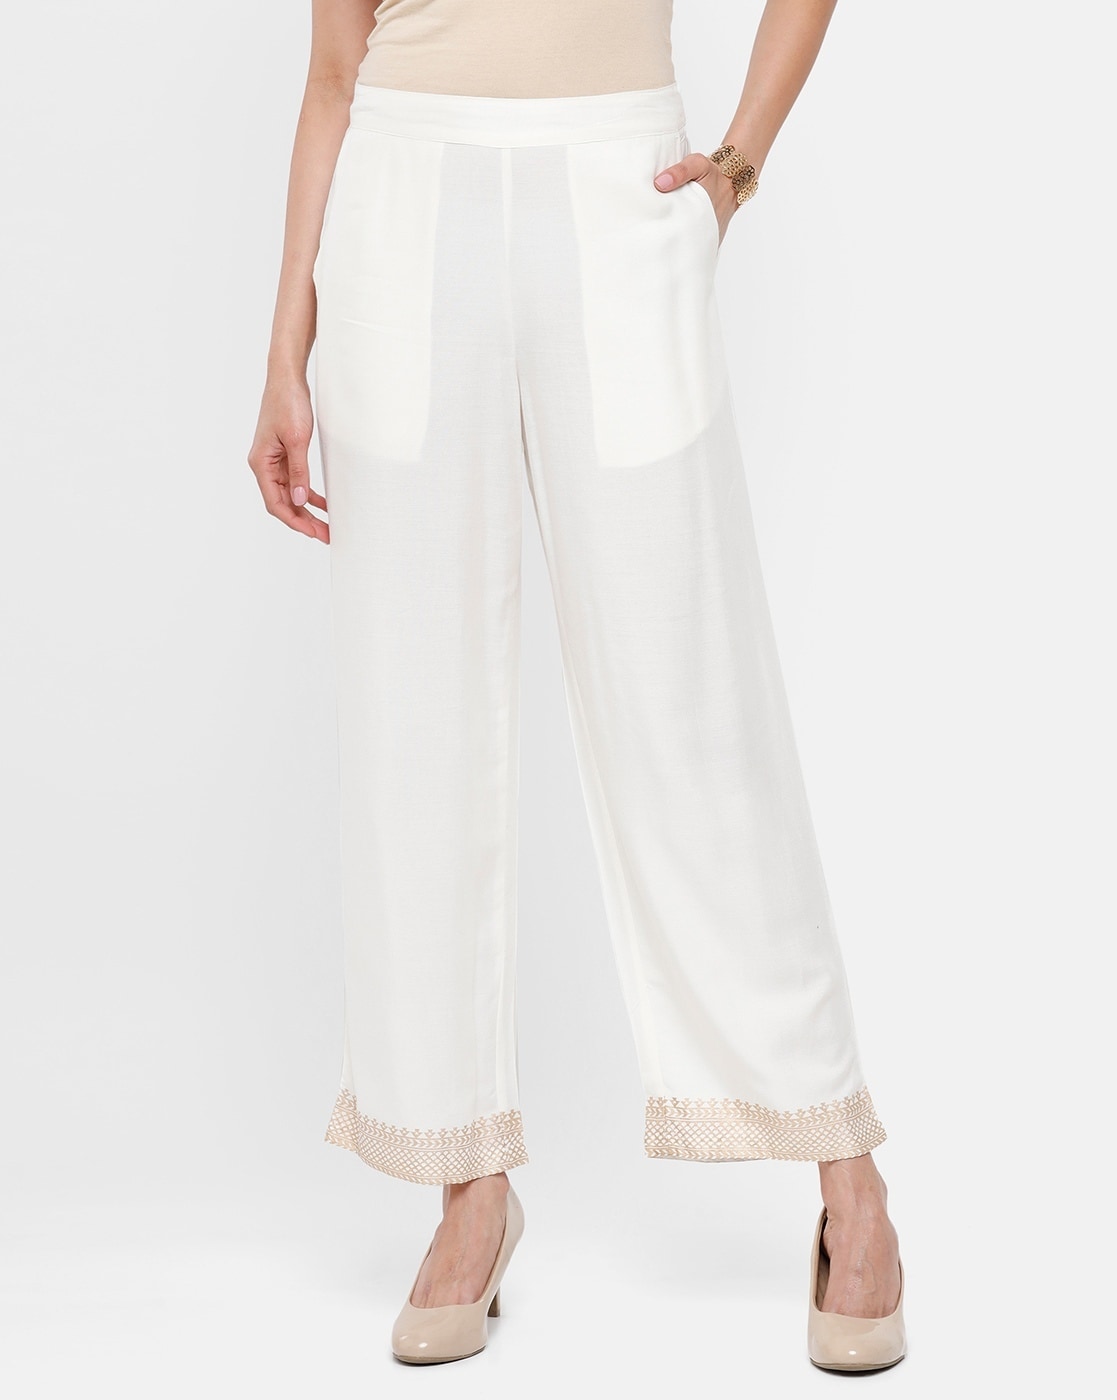 Buy White Trousers & Pants for Women by LYRA Online | Ajio.com